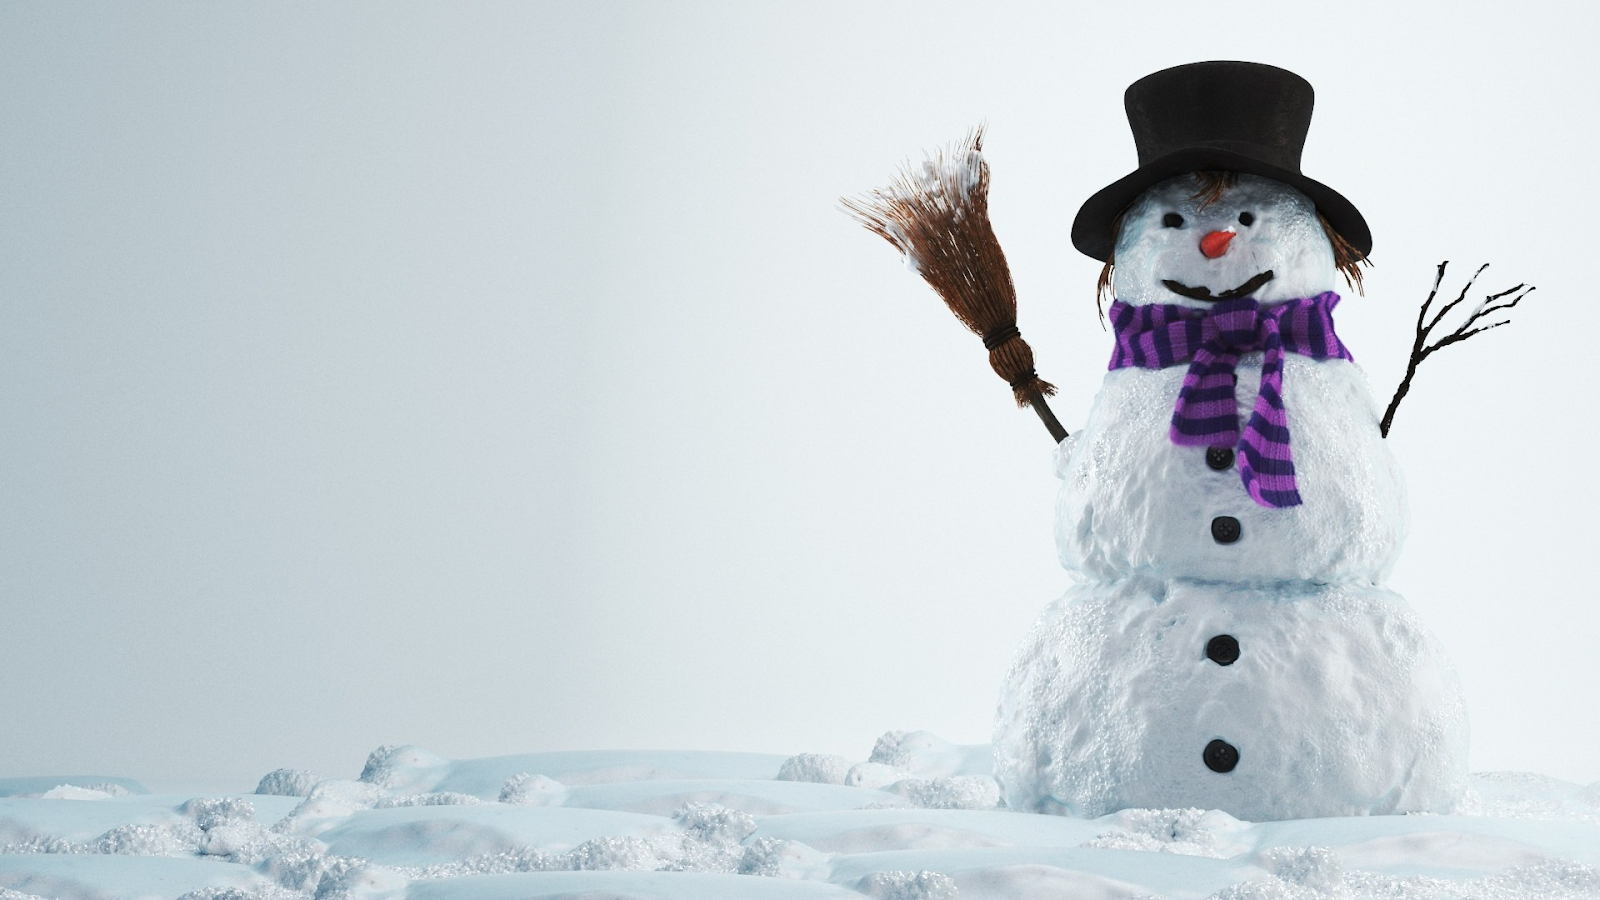 Snowman 3D model by RaveeCG. Product ID: 2013399

A 3D snowman ready to insert into a holiday scene.